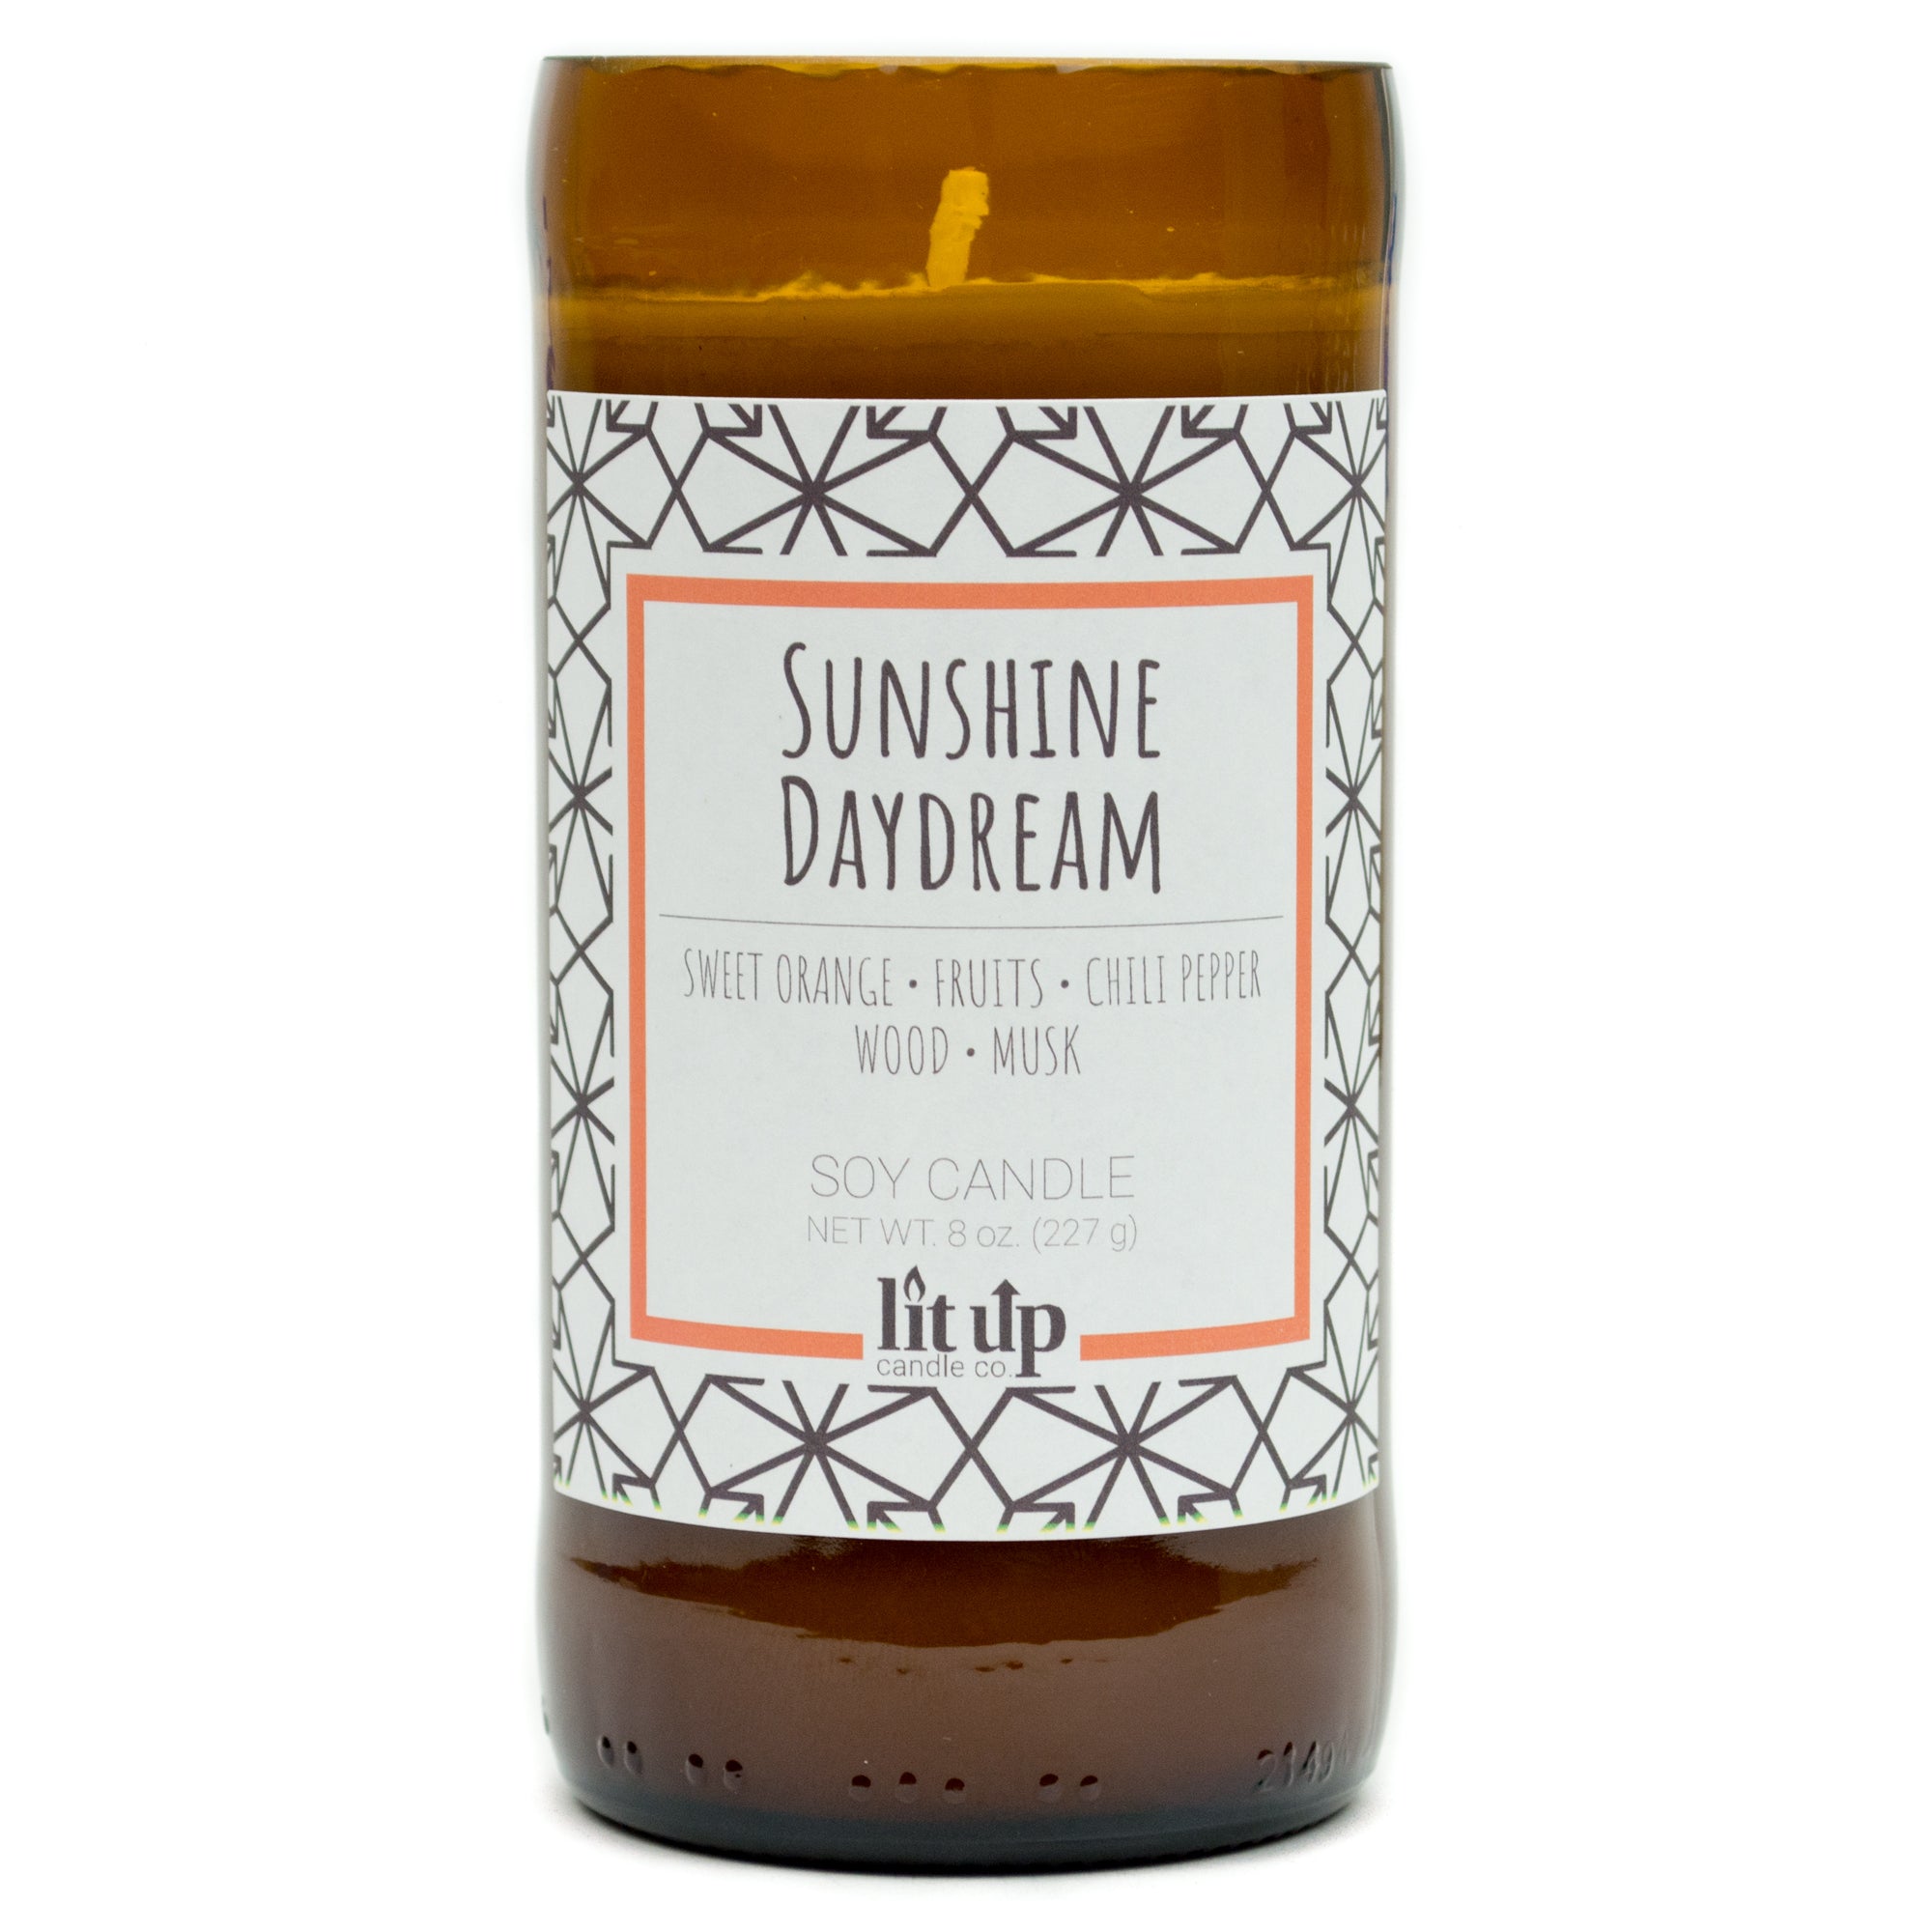 Sunshine Daydream scented 8 oz. soy candle in upcycled beer bottle - FKA Sweet Orange & Chili Pepper